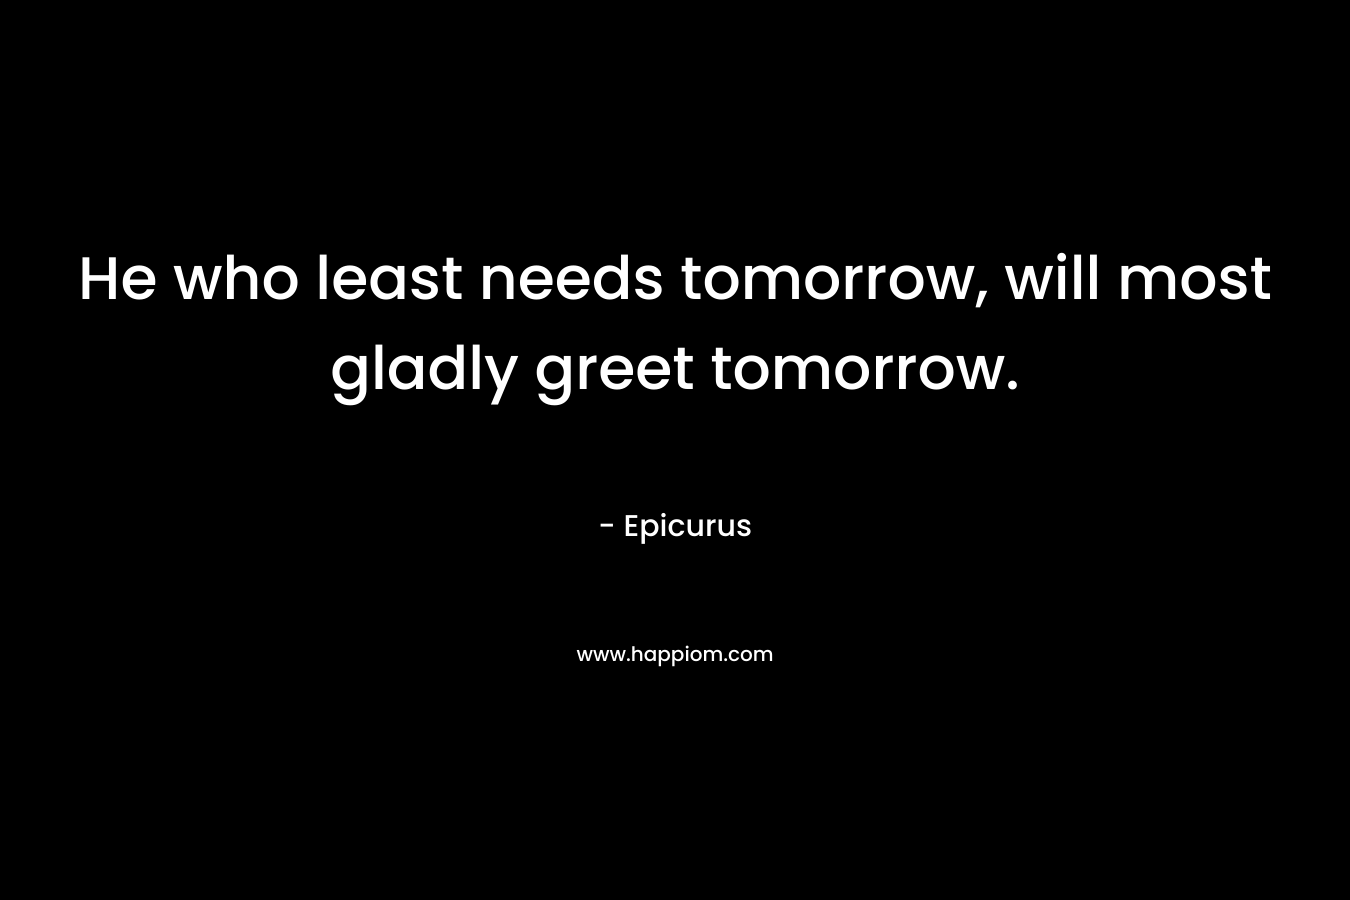 He who least needs tomorrow, will most gladly greet tomorrow.